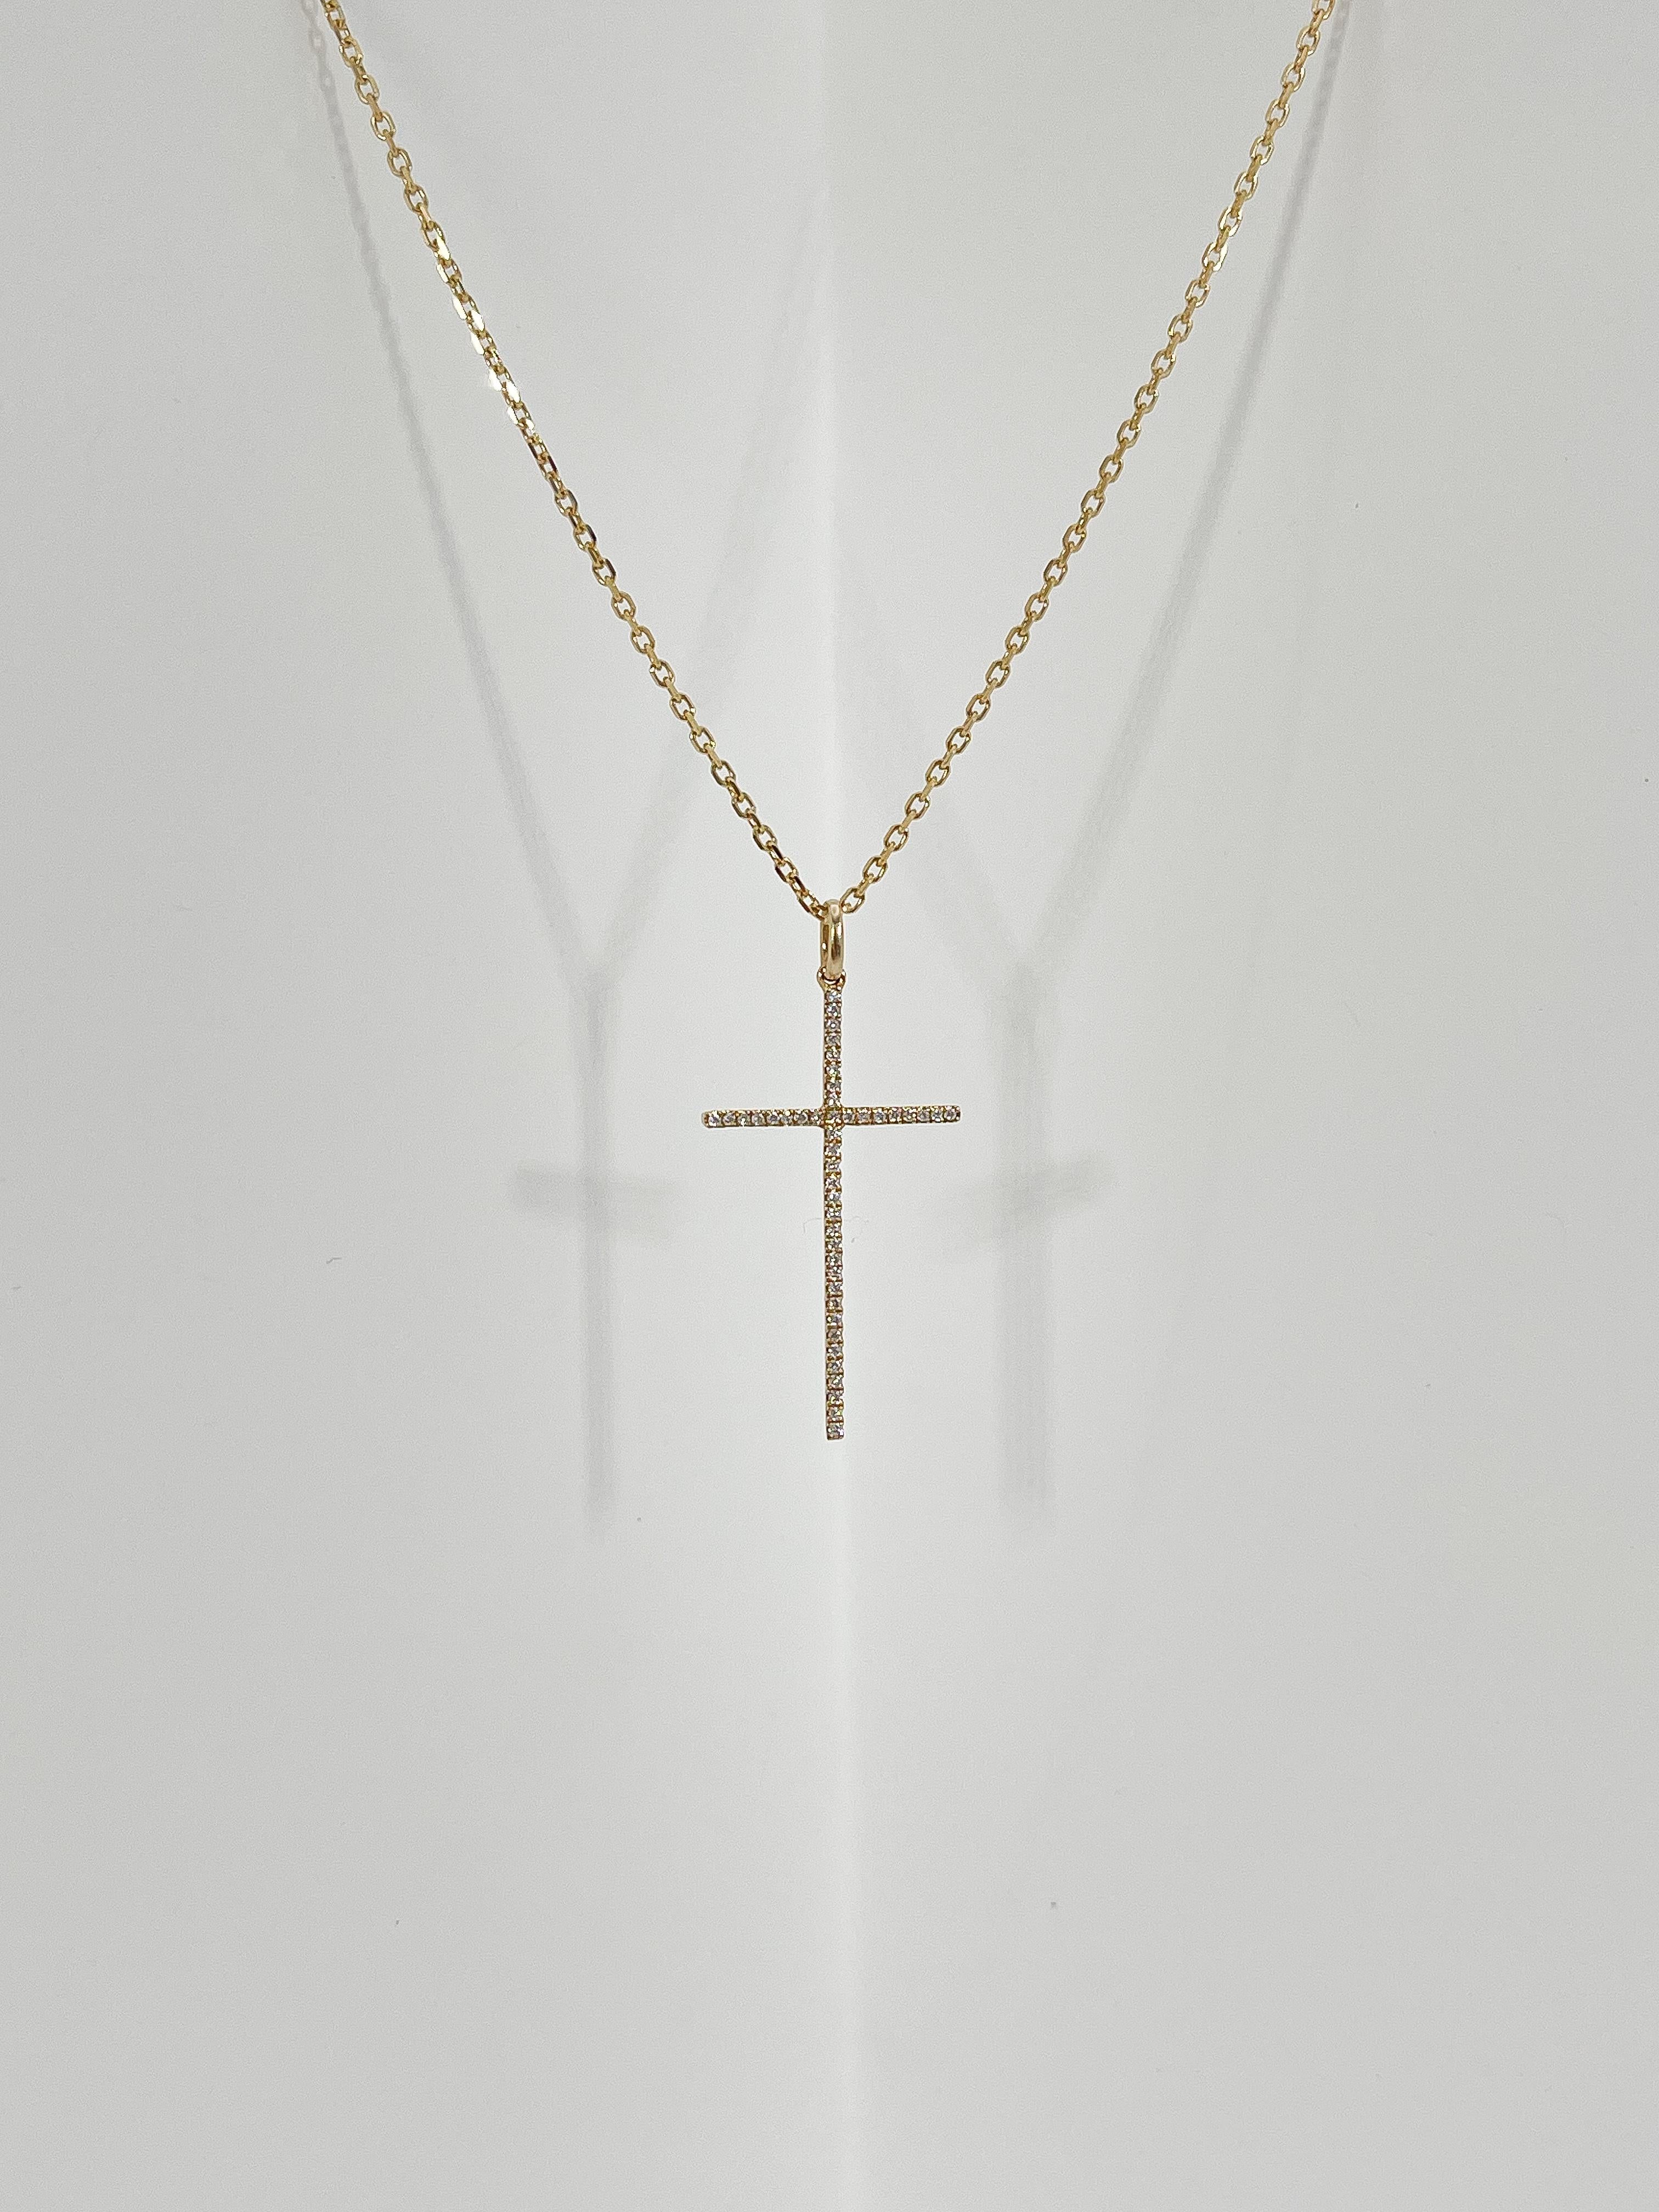 14k yellow gold .12 CTW diamond cross necklace. The stones in this necklace are all round, has a lobster clasp to open and close, the length of the necklace is 17 inches, the cross measures 29.5 x 16.5 mm, and has a total weight of 2.5 grams.